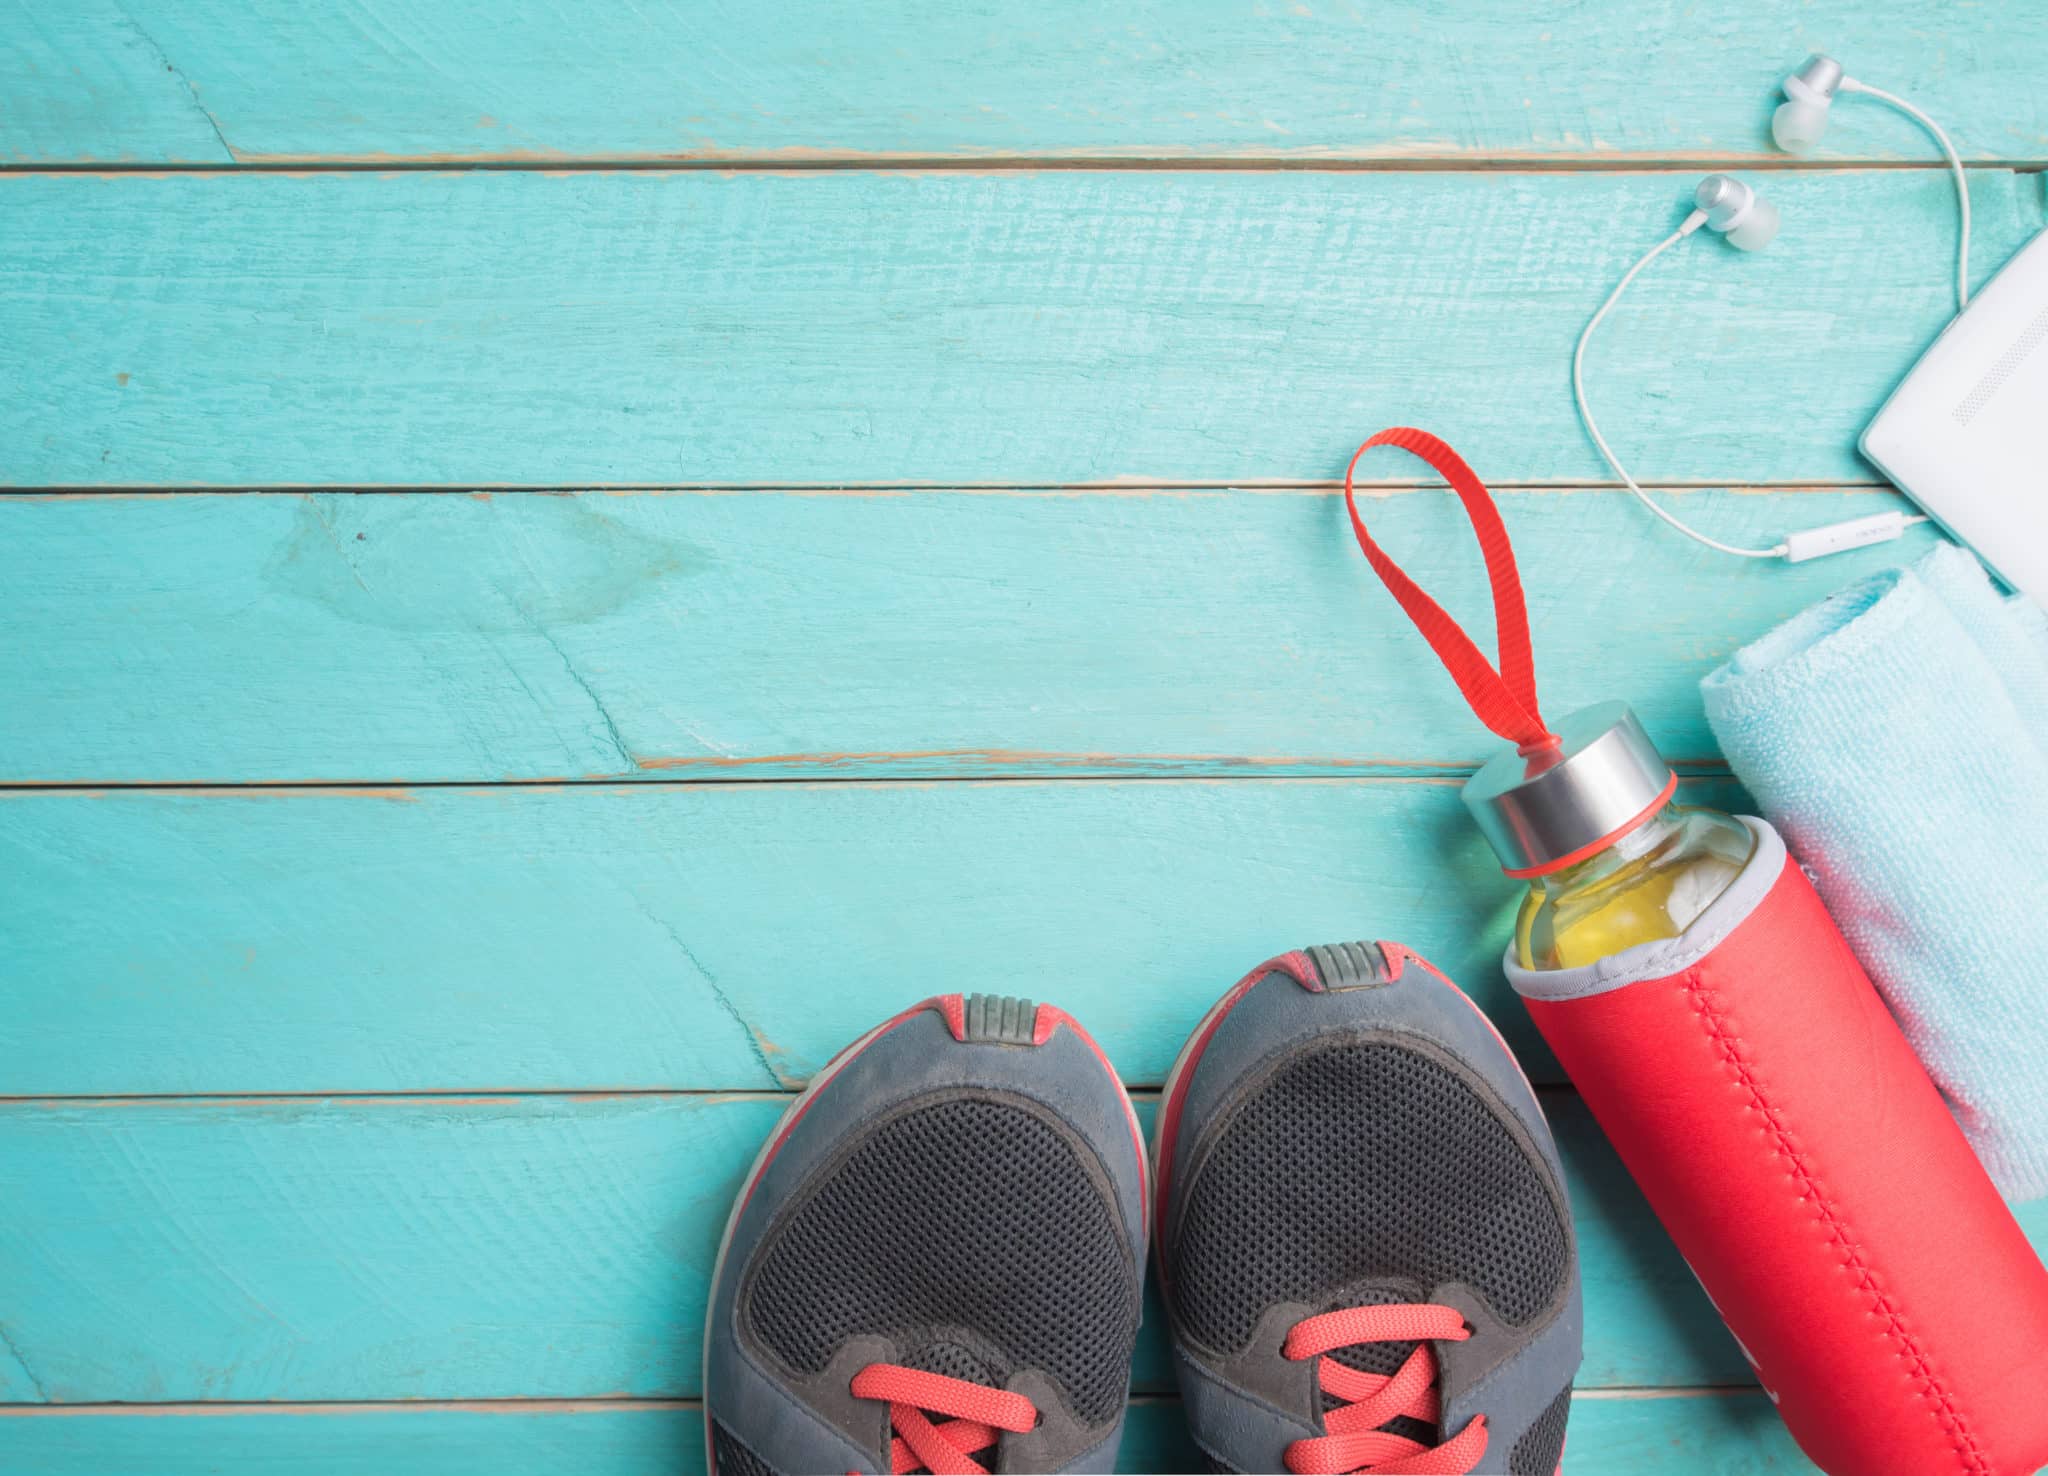 A pair of running shoes next to a water bottle against a wooden blue background.